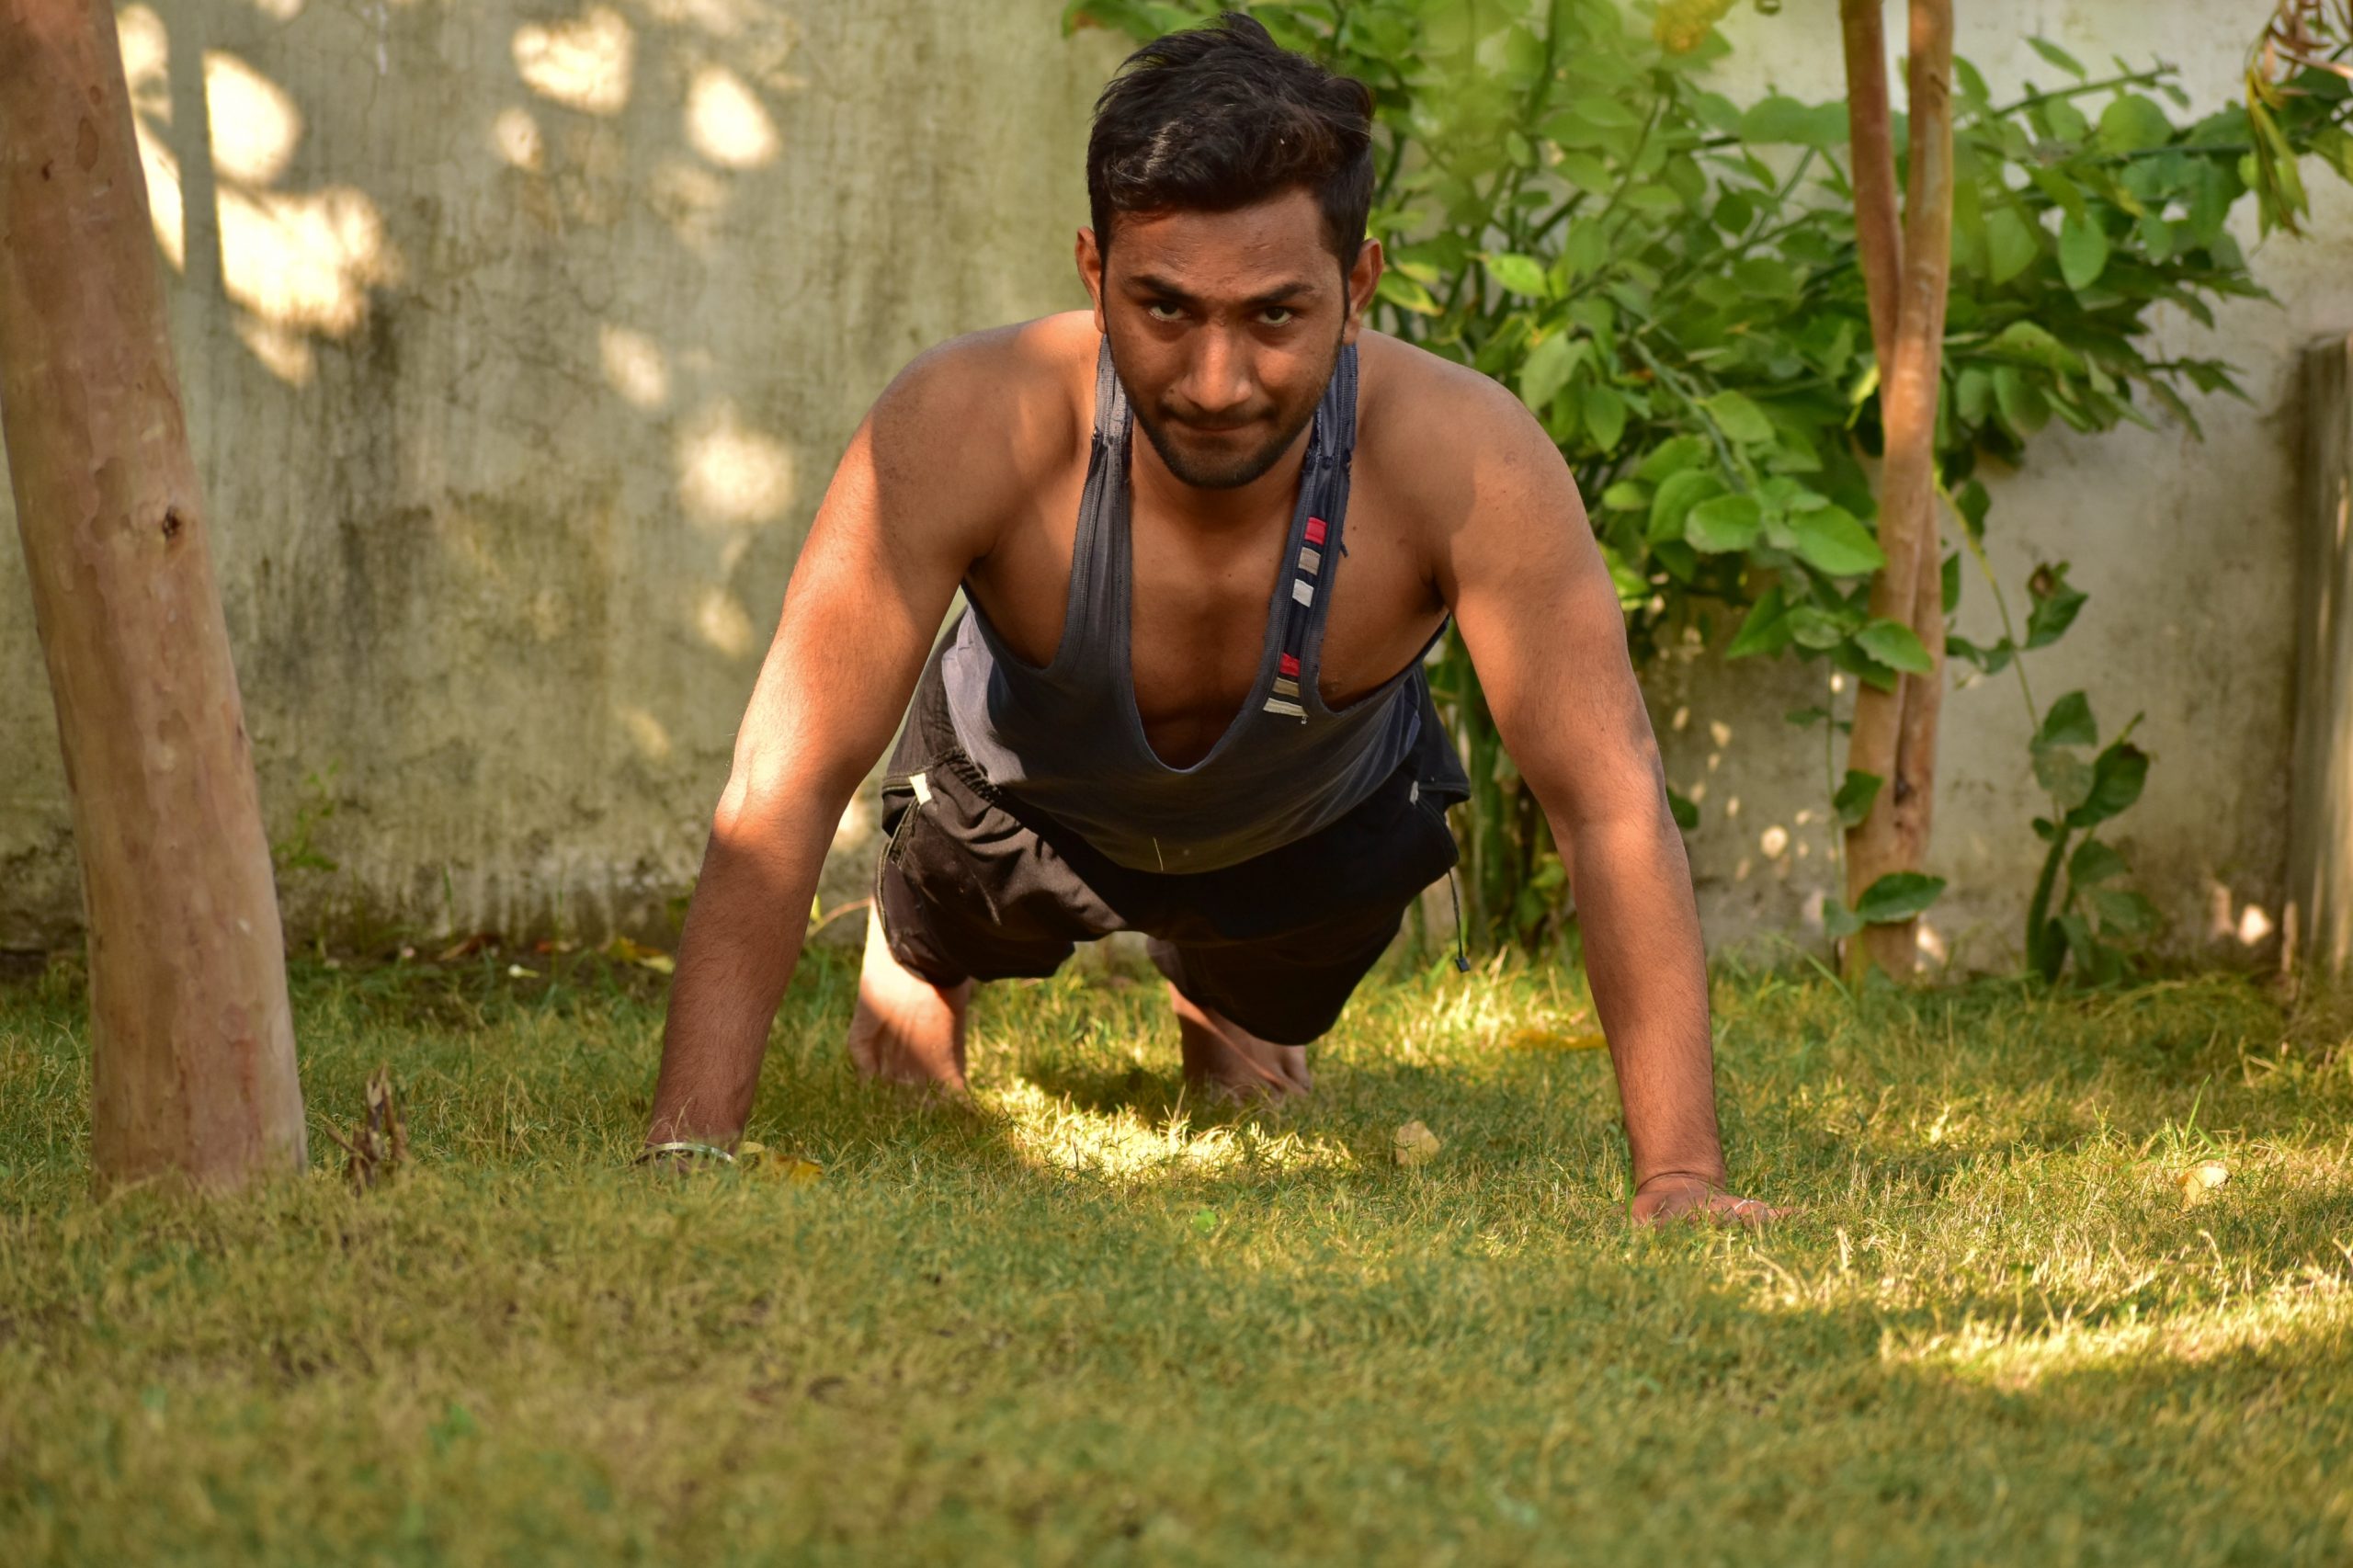 A man practicing pushup exercise